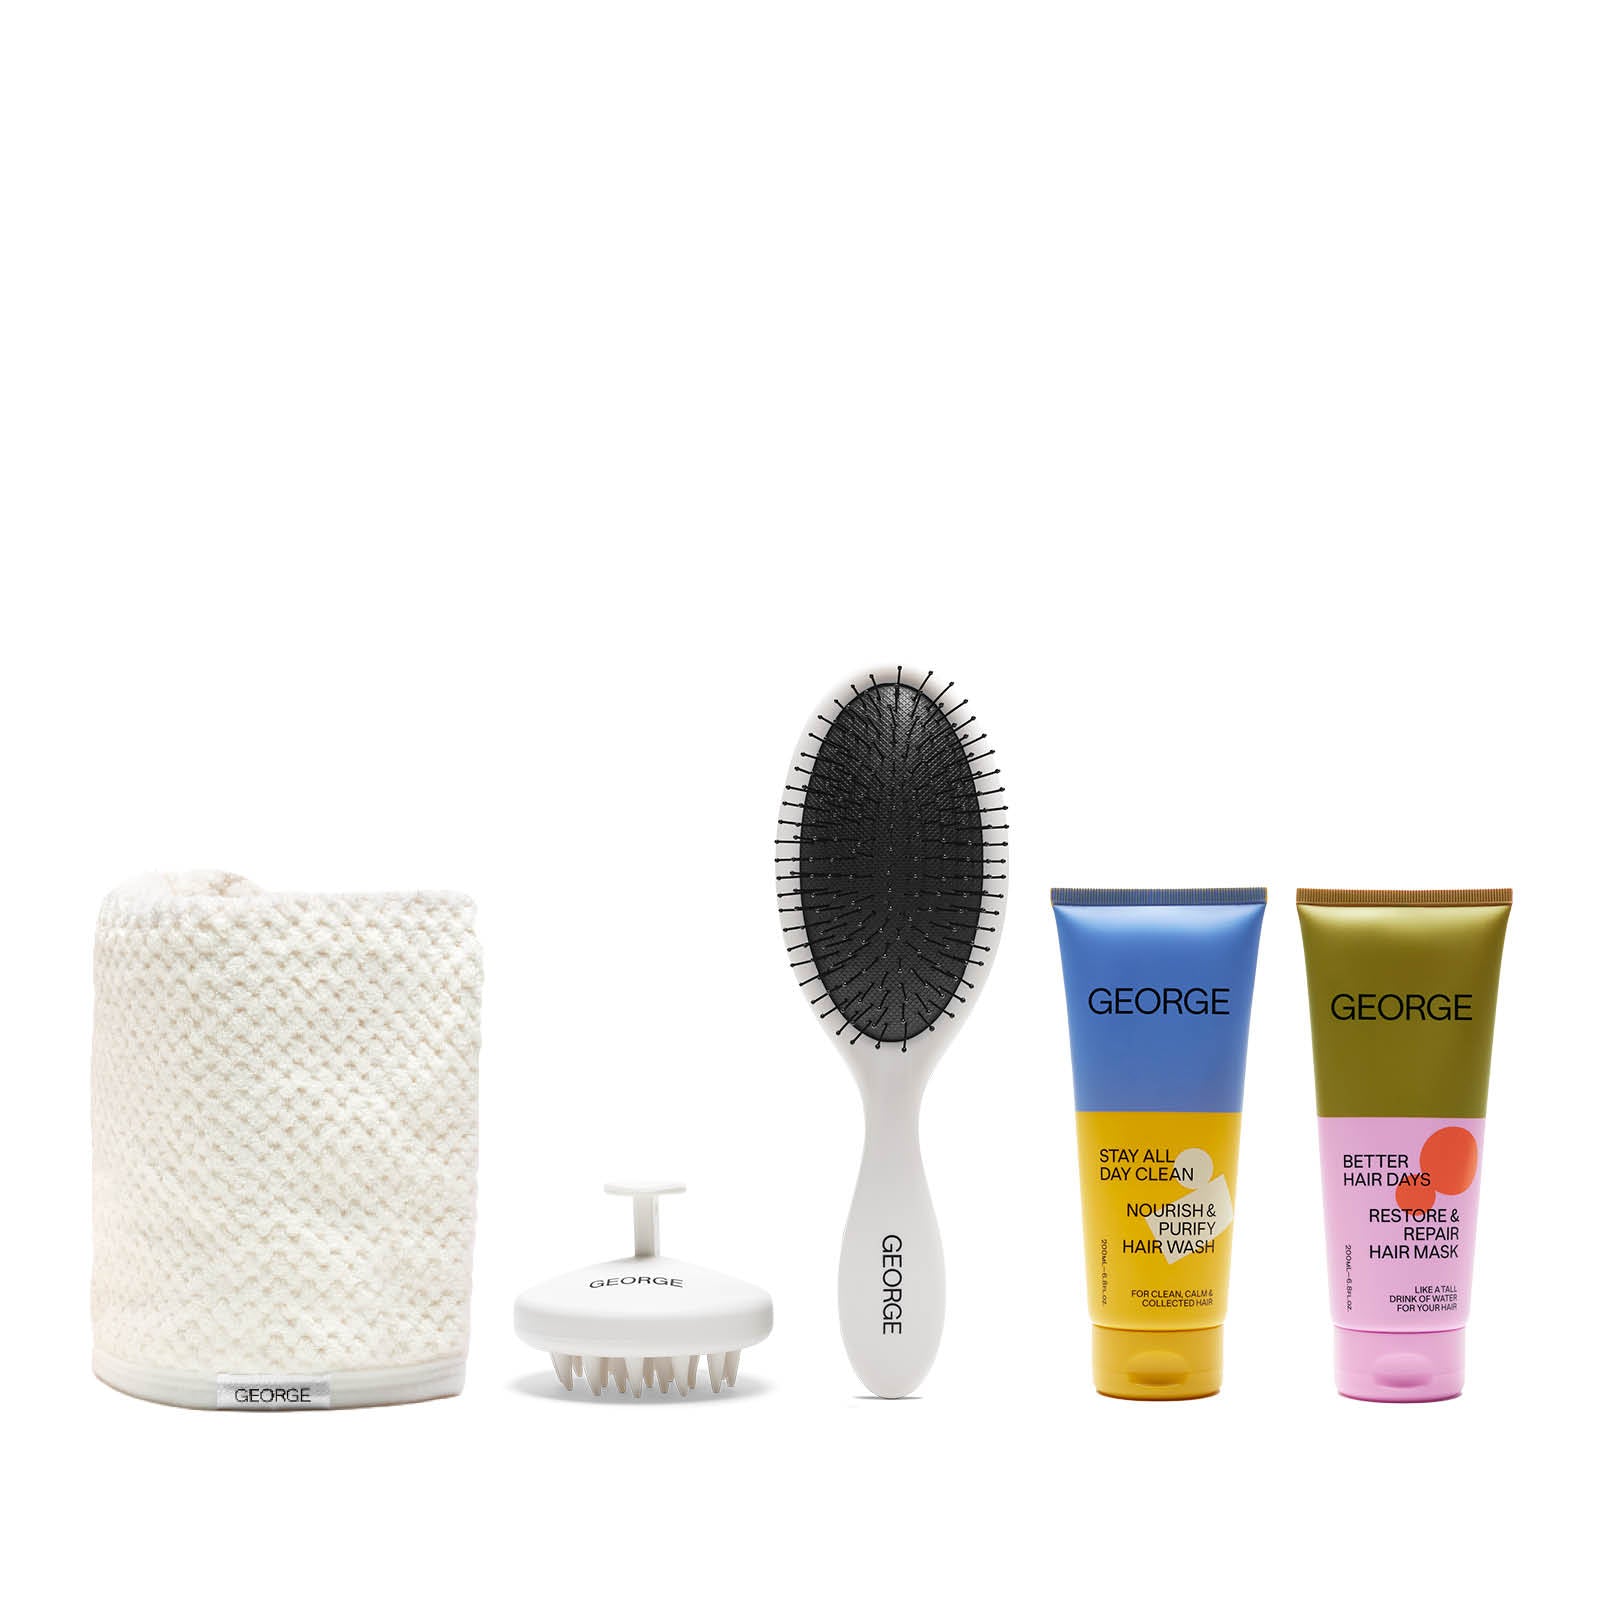 Higher Vibes Hair Routine Kit - George Haircare